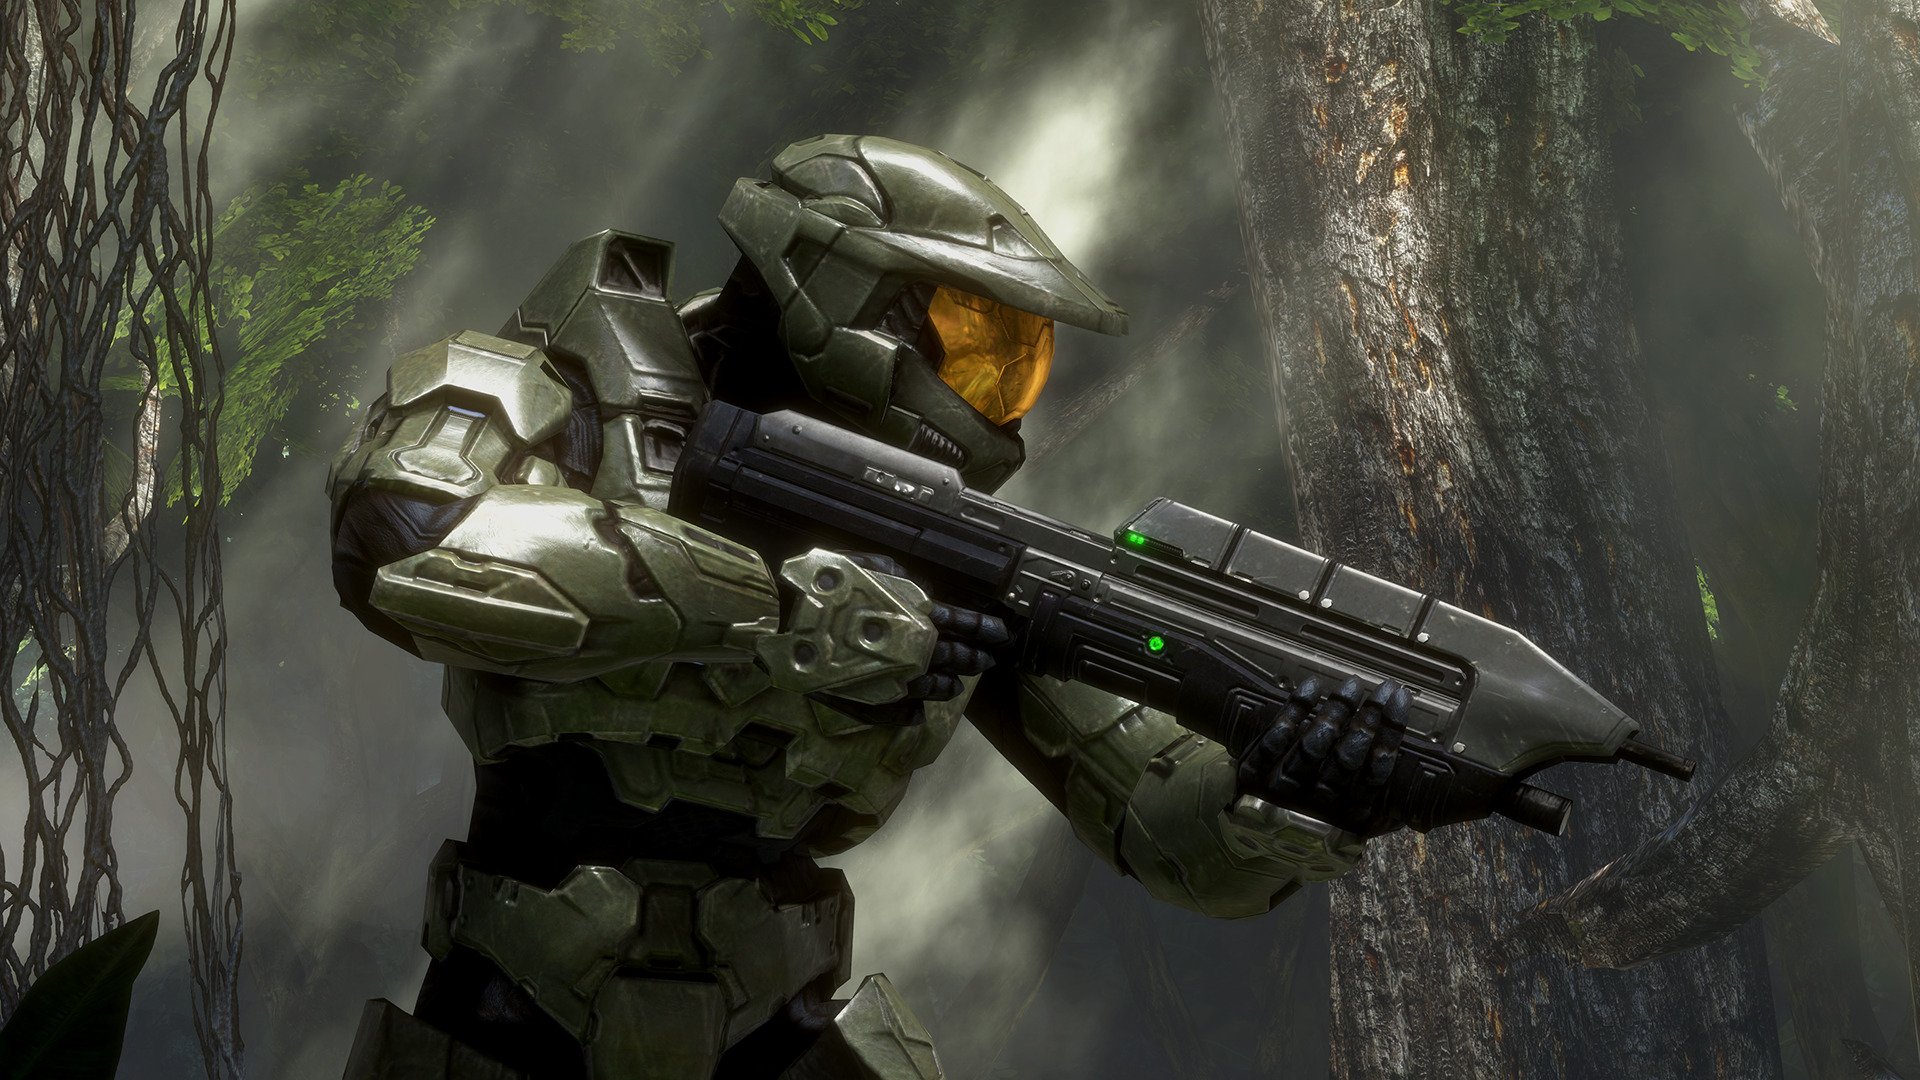 The Halo TV series' first full trailer shows Master Chief in